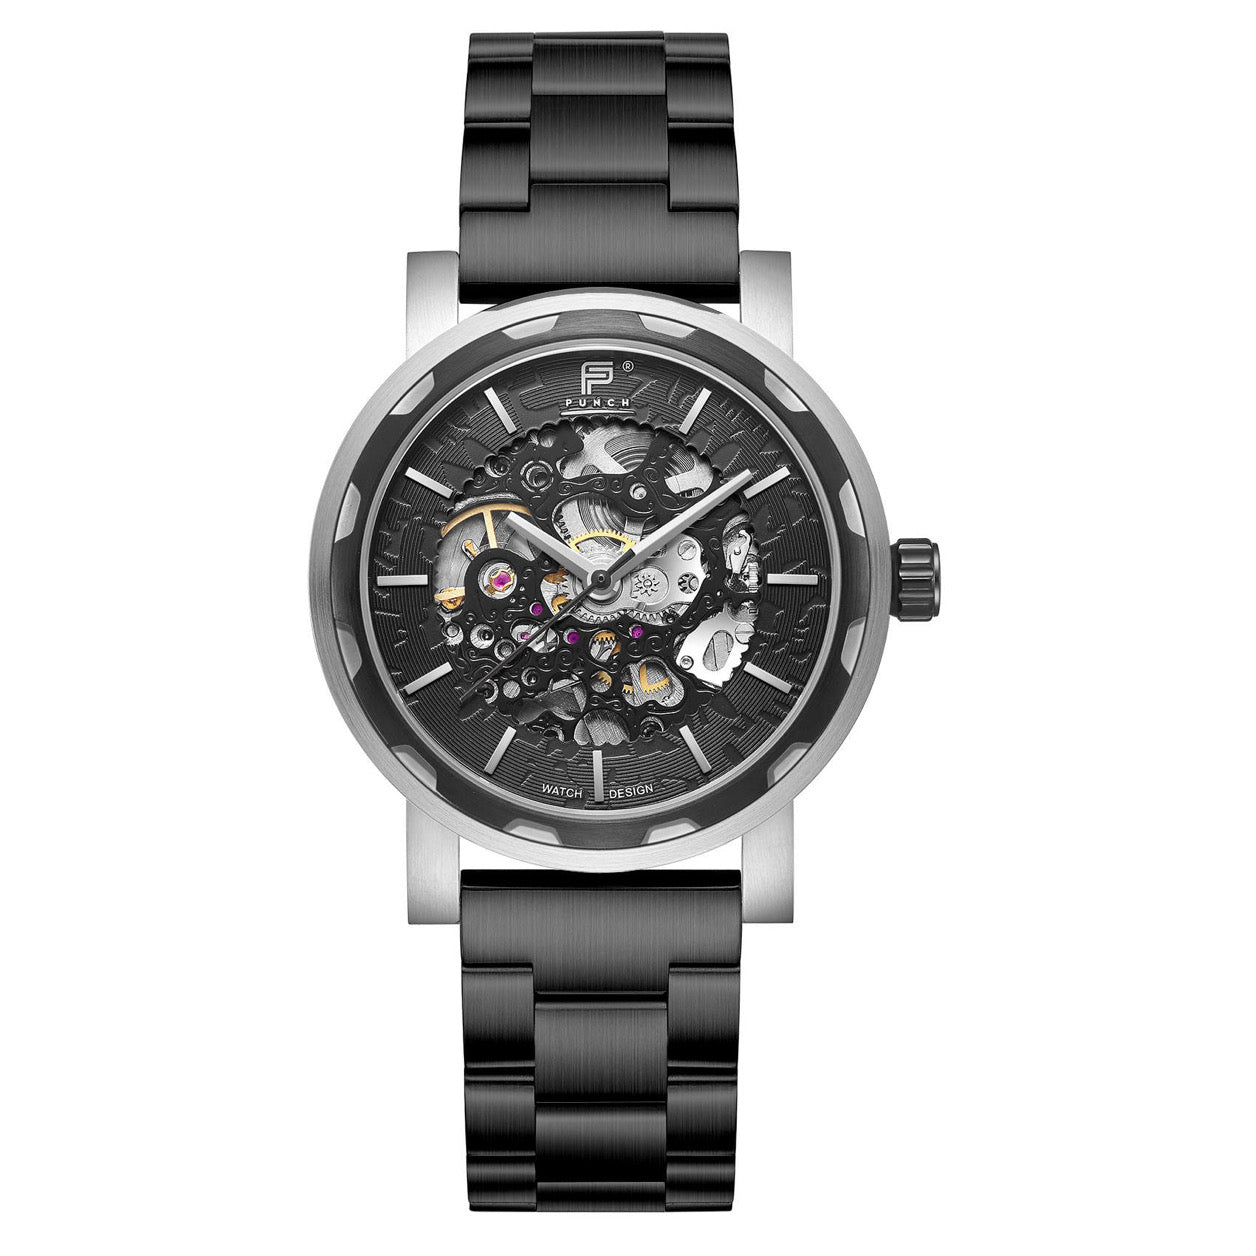 Silver Skeleton Automatic Men's Watch with Black Face and black Metal Link Stainless Steel Strap - Front View